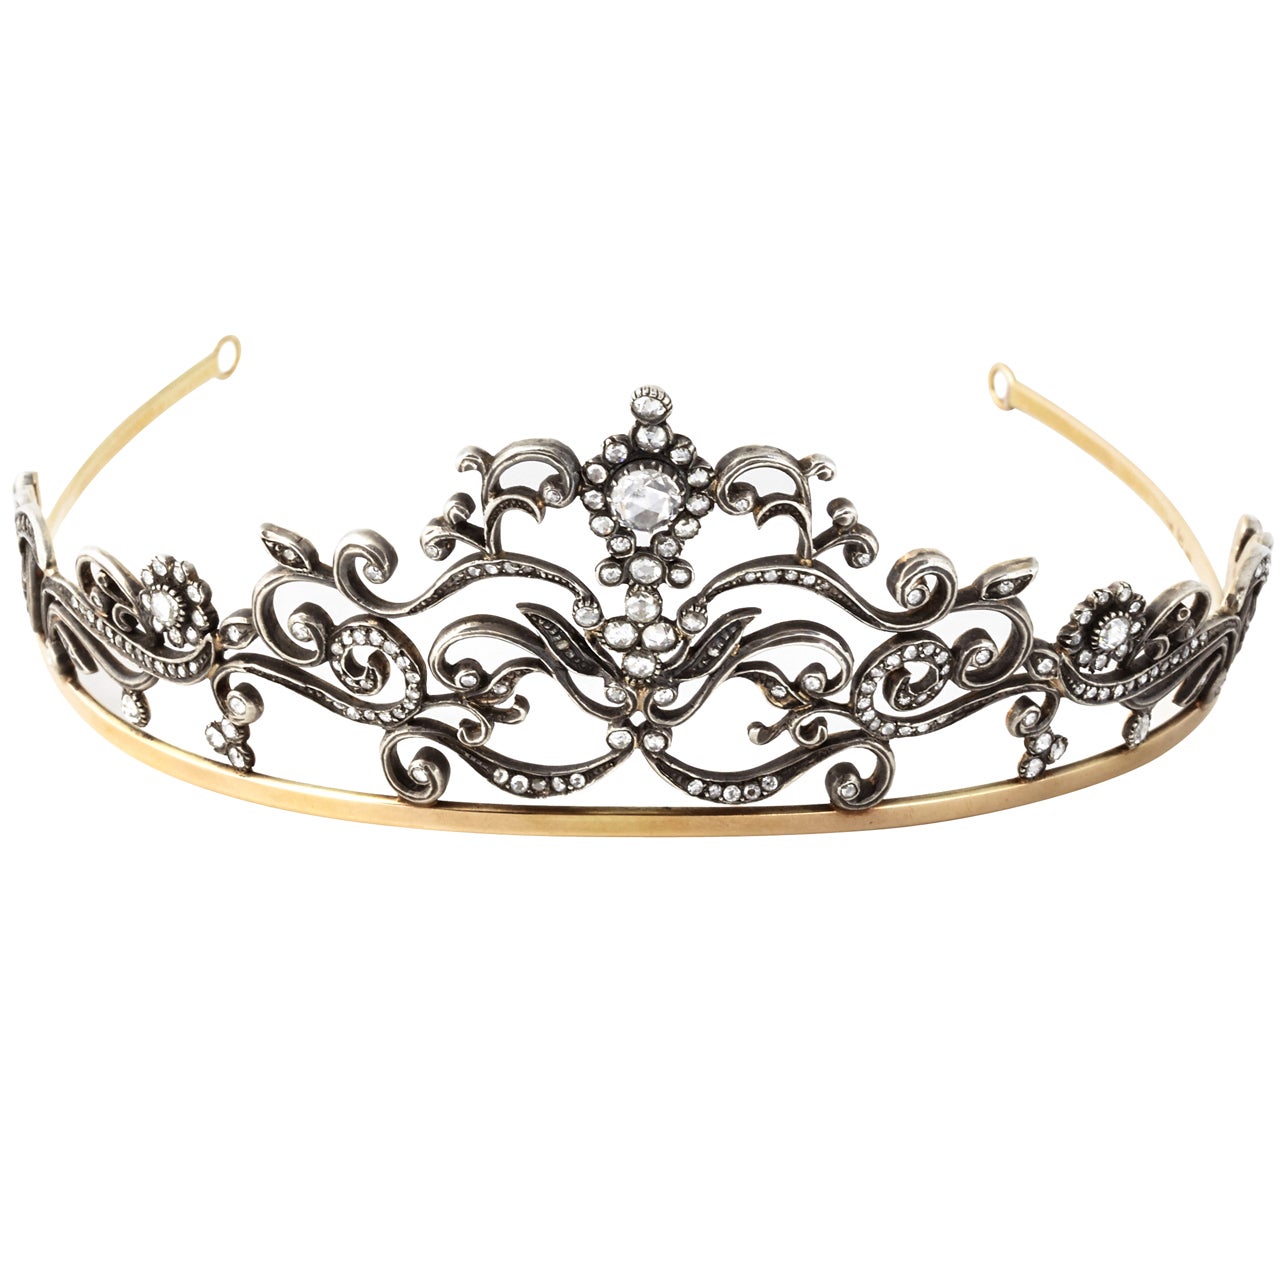 A silver, golden tiara surrounded with rose cut diamonds For Sale